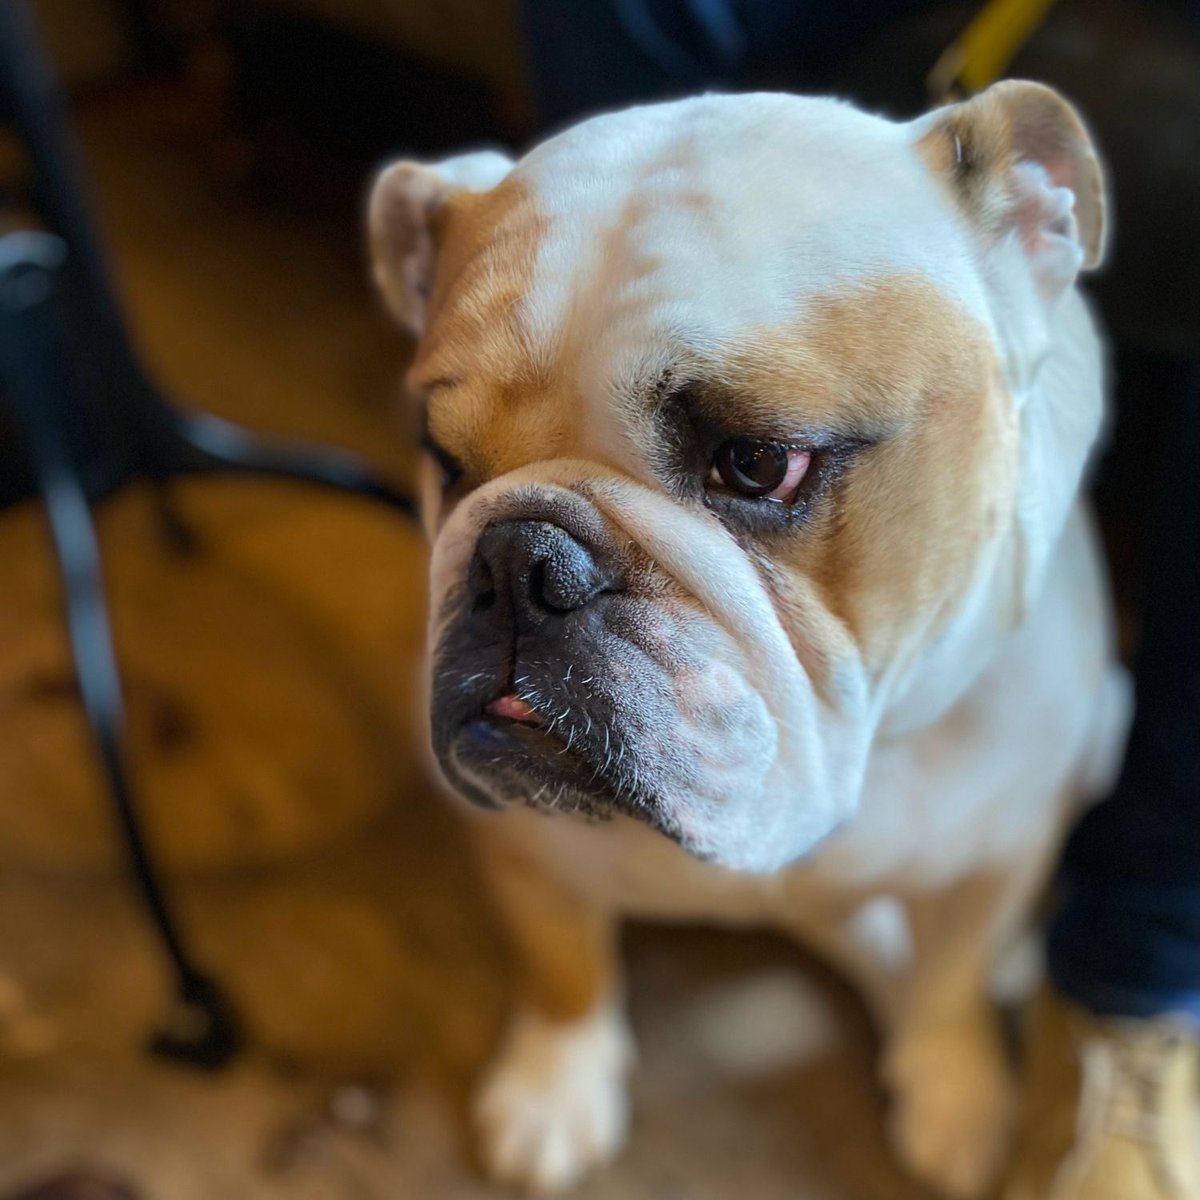 It must be #Saturday as there is a very long wait for #Snacks apparently, I’ll have to see if I can upgrade my water to a beer 🍺 instead 🐶🐾❤️ Barney #BarneyTheBulldog #DogsOfTwitter #DogsOfX #DogsOfIG #DogsOfFacebook #Bulldog #EnglishBulldog #Weekend #Pub